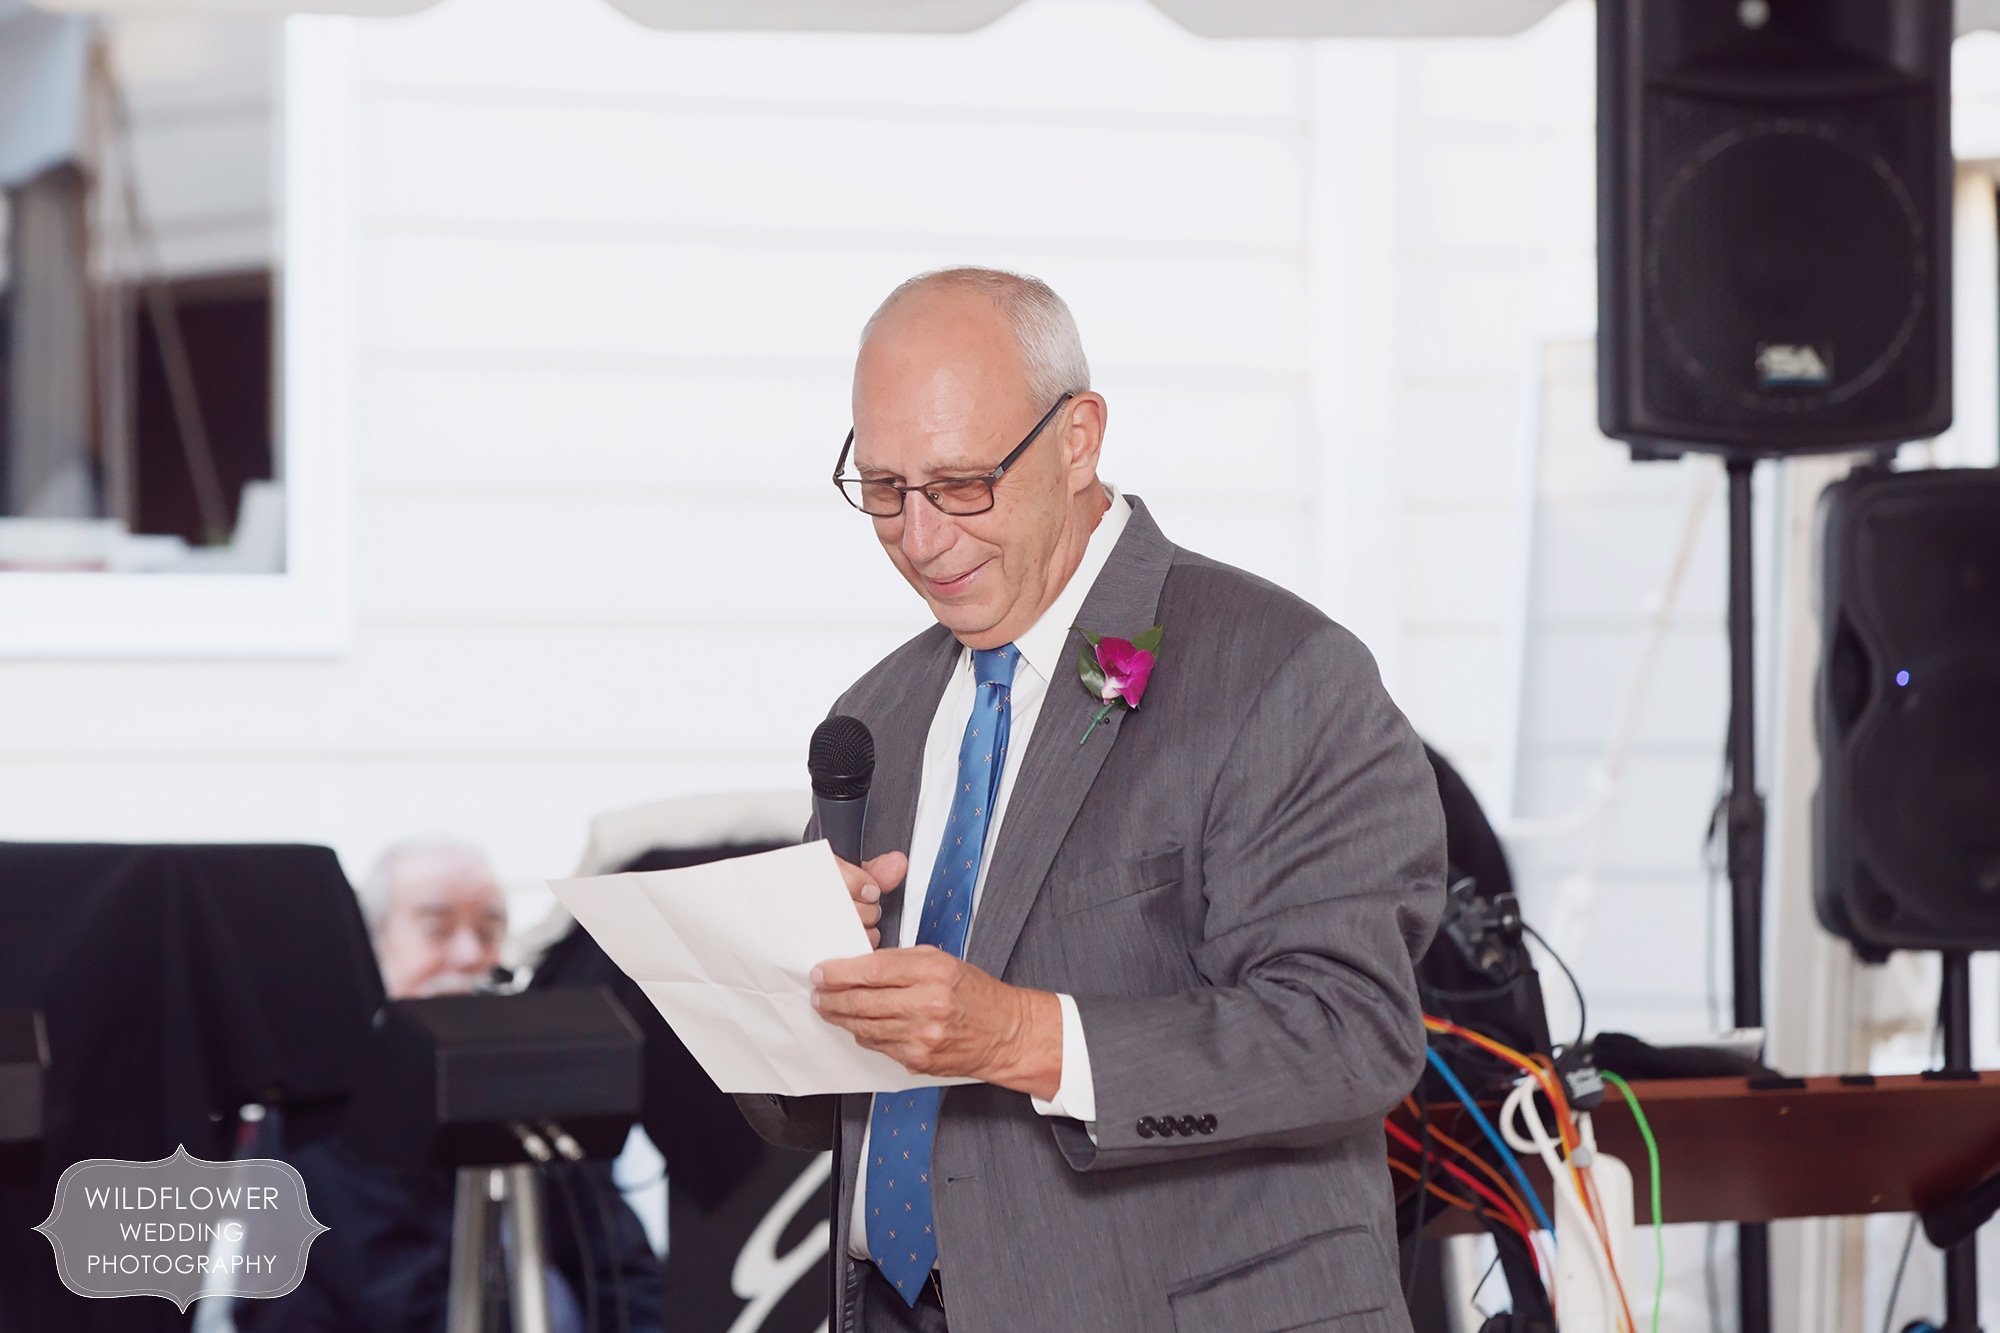 The father of the bride, Dr. Joseph Hurley, gives a speech to his daughter at this backyard wedding in St. Louis.